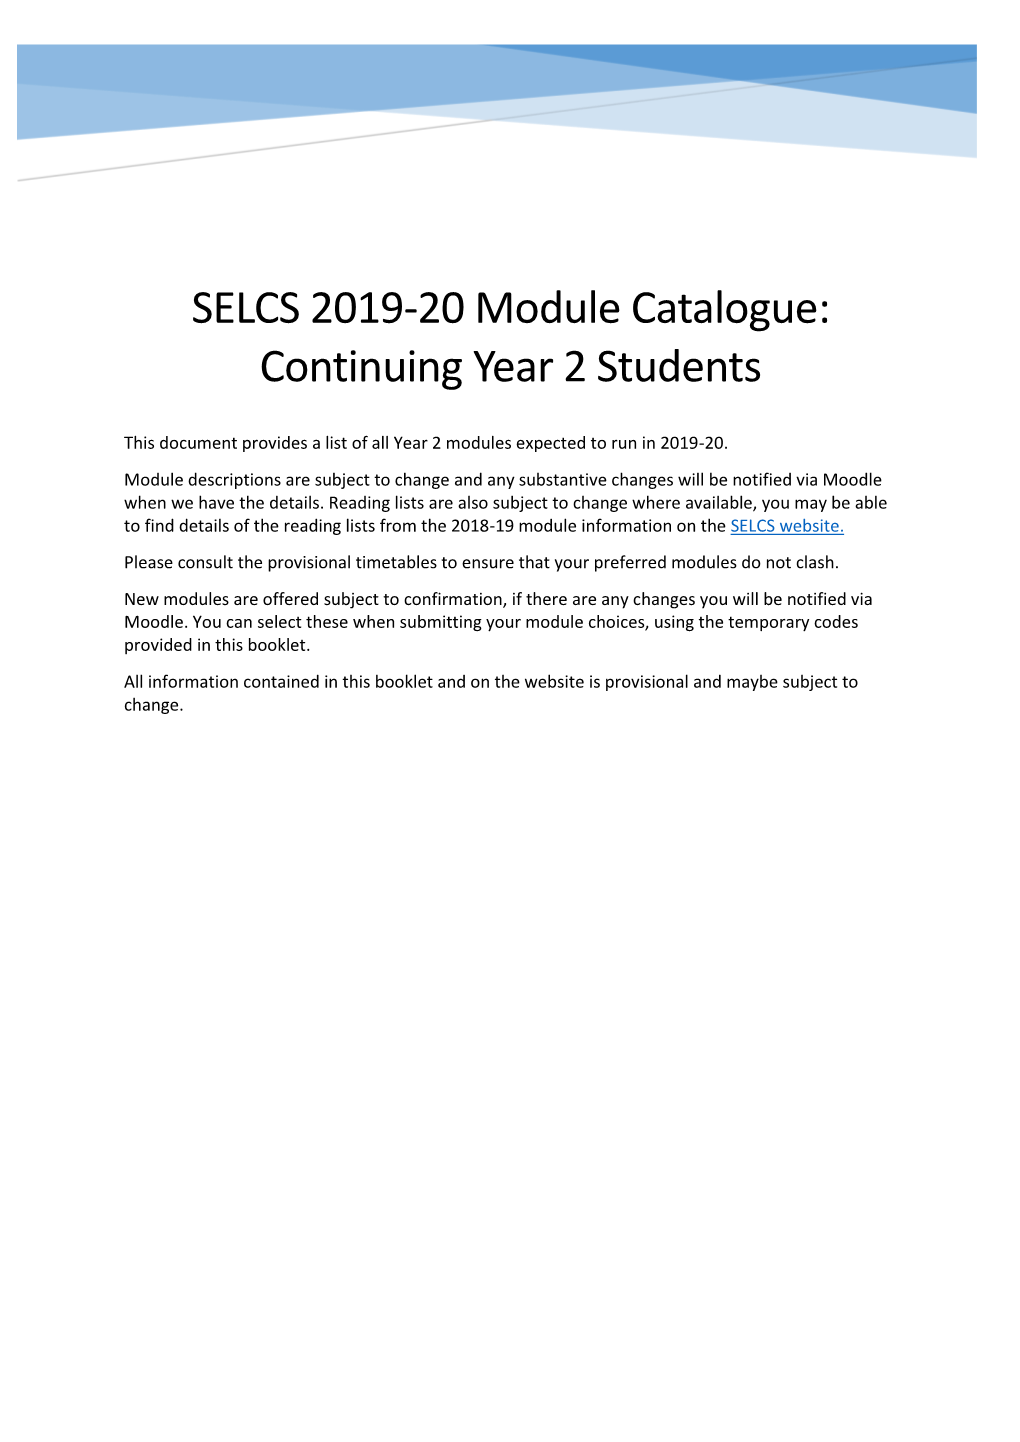 SELCS 2019-20 Module Catalogue: Continuing Year 2 Students